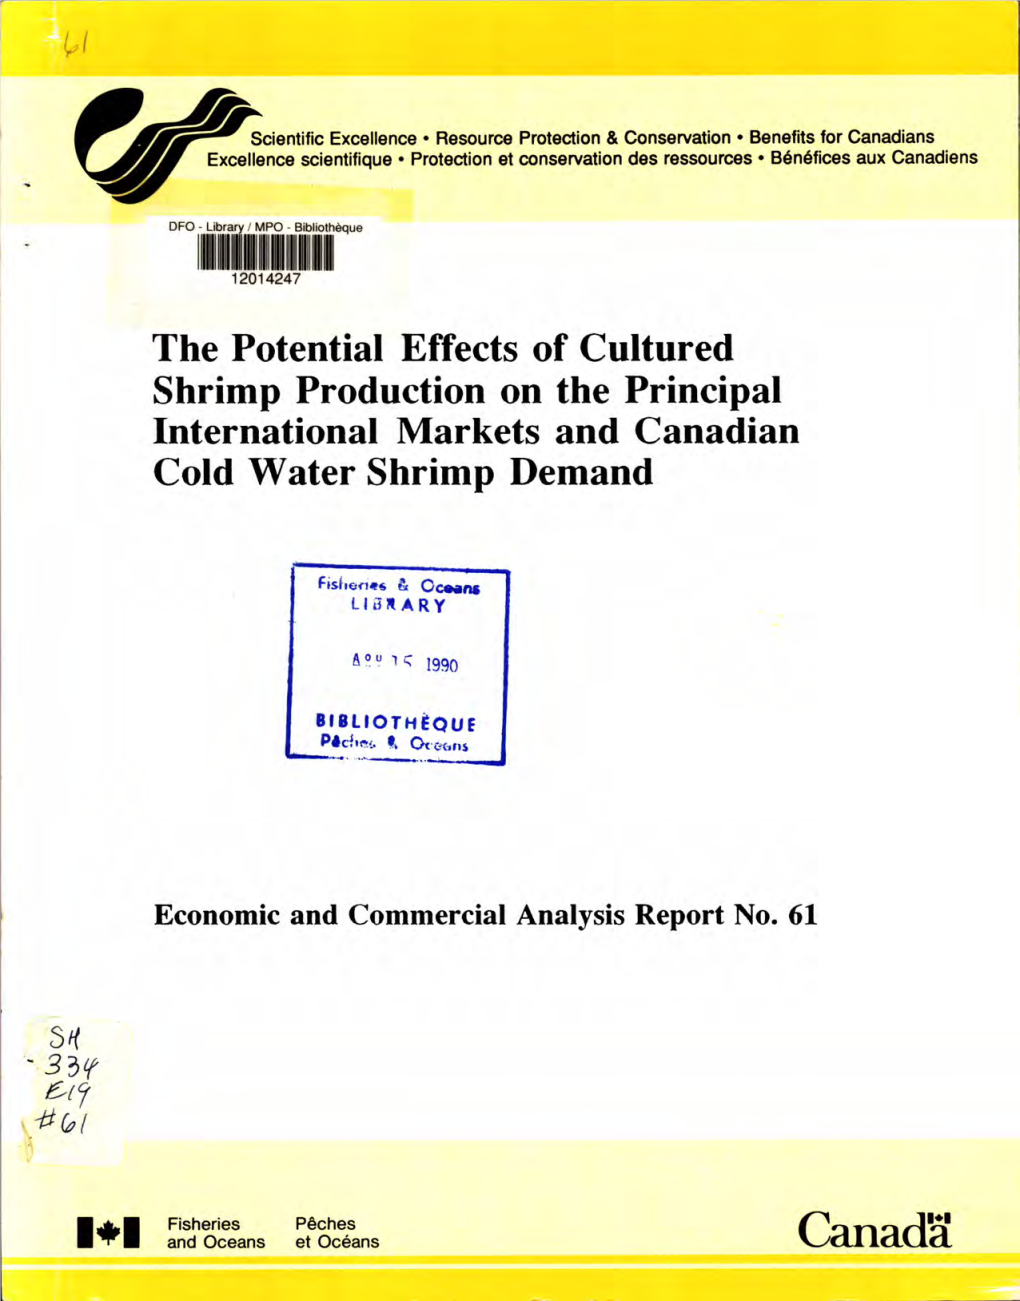 Shrimp Production on the Principal International Markets and Canadian Cold Water Shrimp Demand